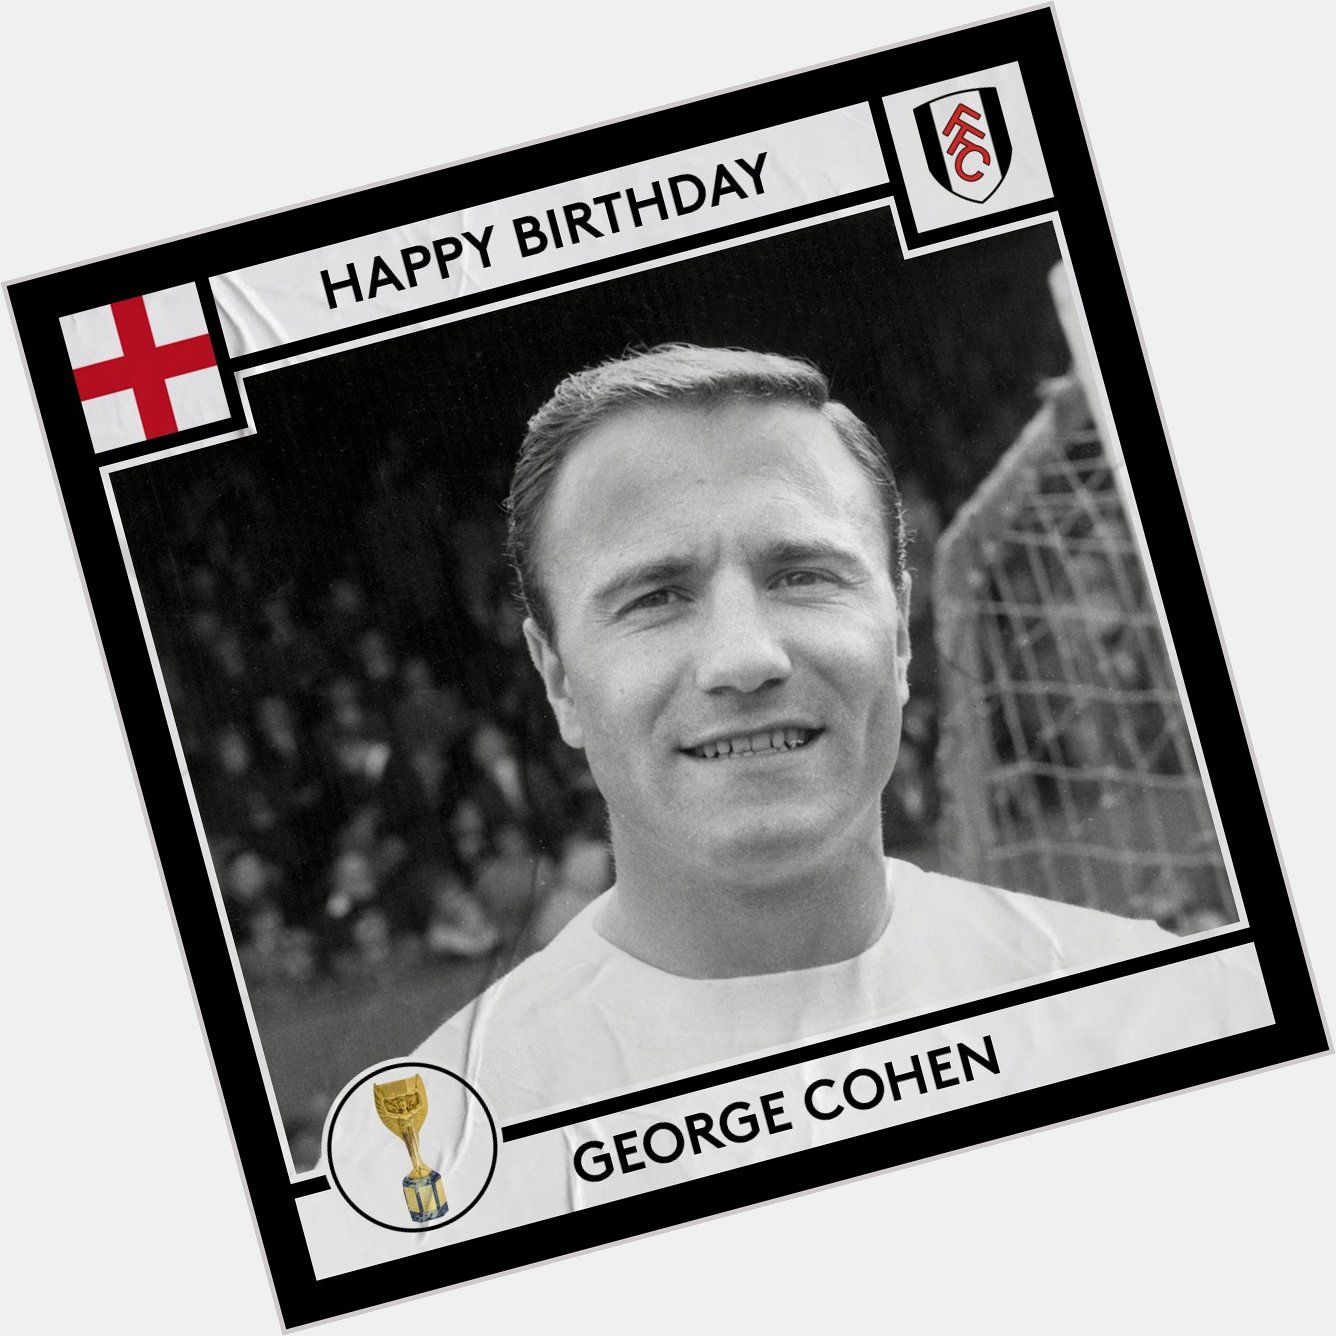 We\re wishing a very happy 80th birthday to George Cohen  